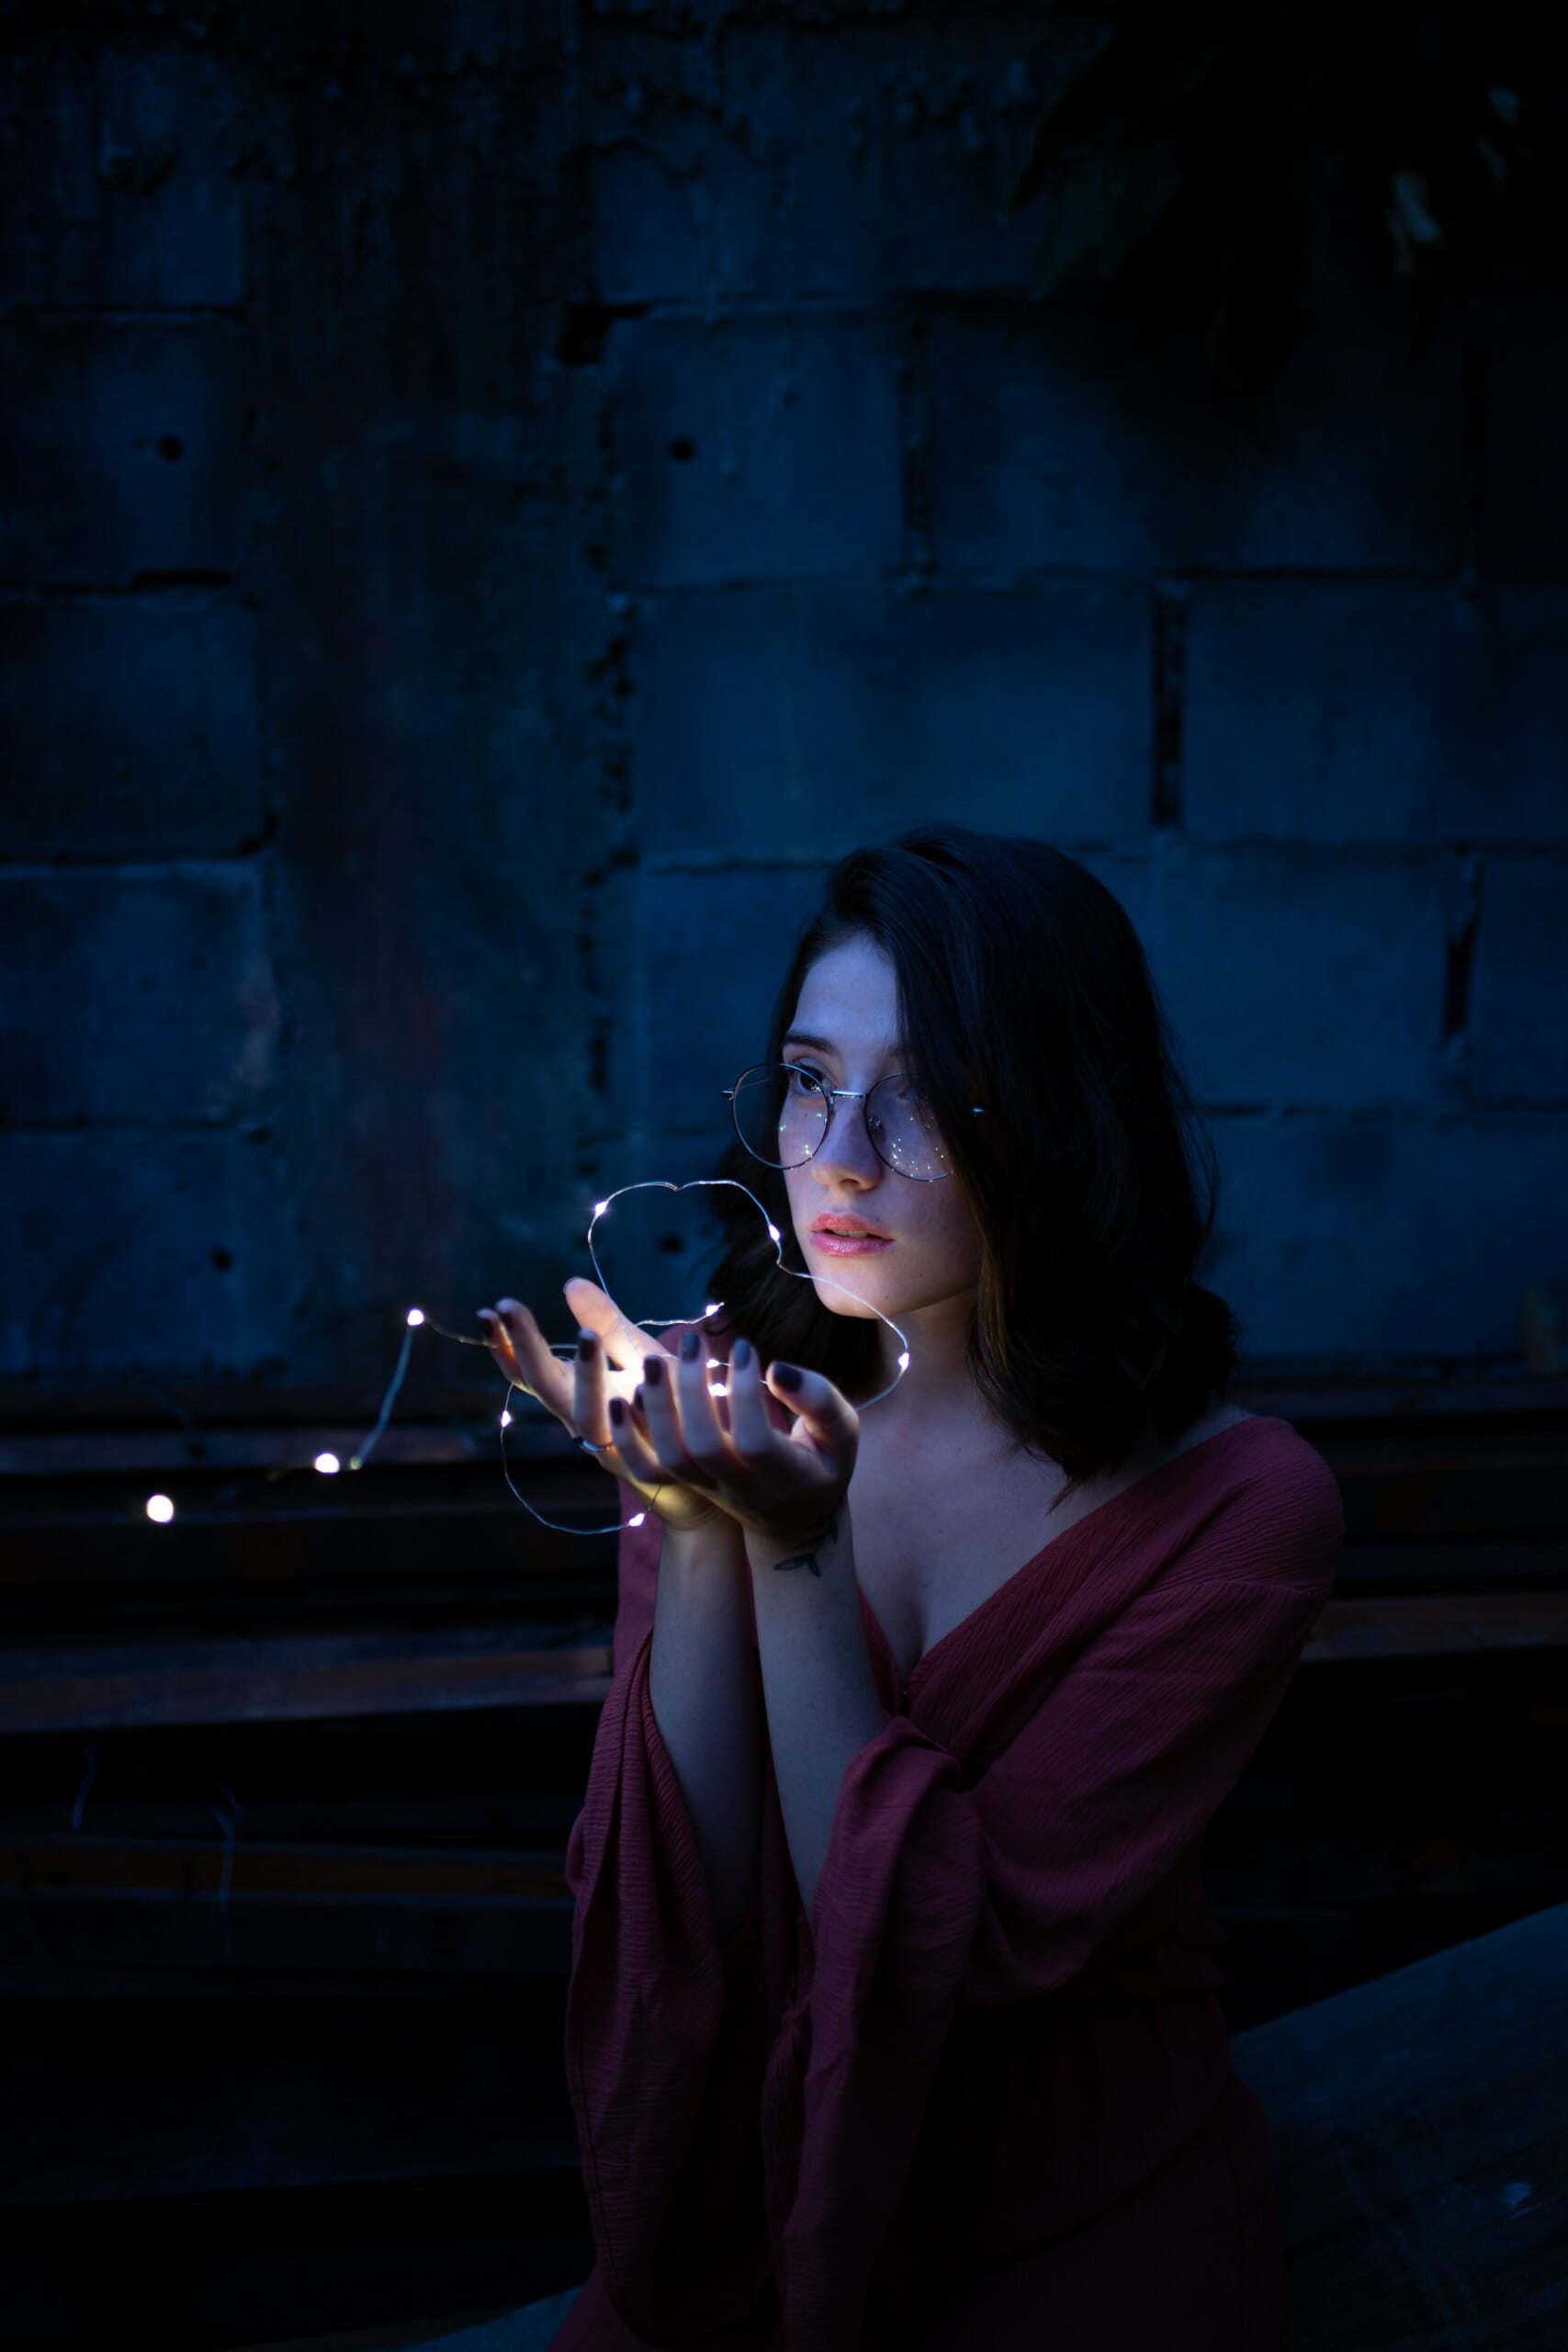 Woman Wearing Red Dress Holding Turned-on String Lights